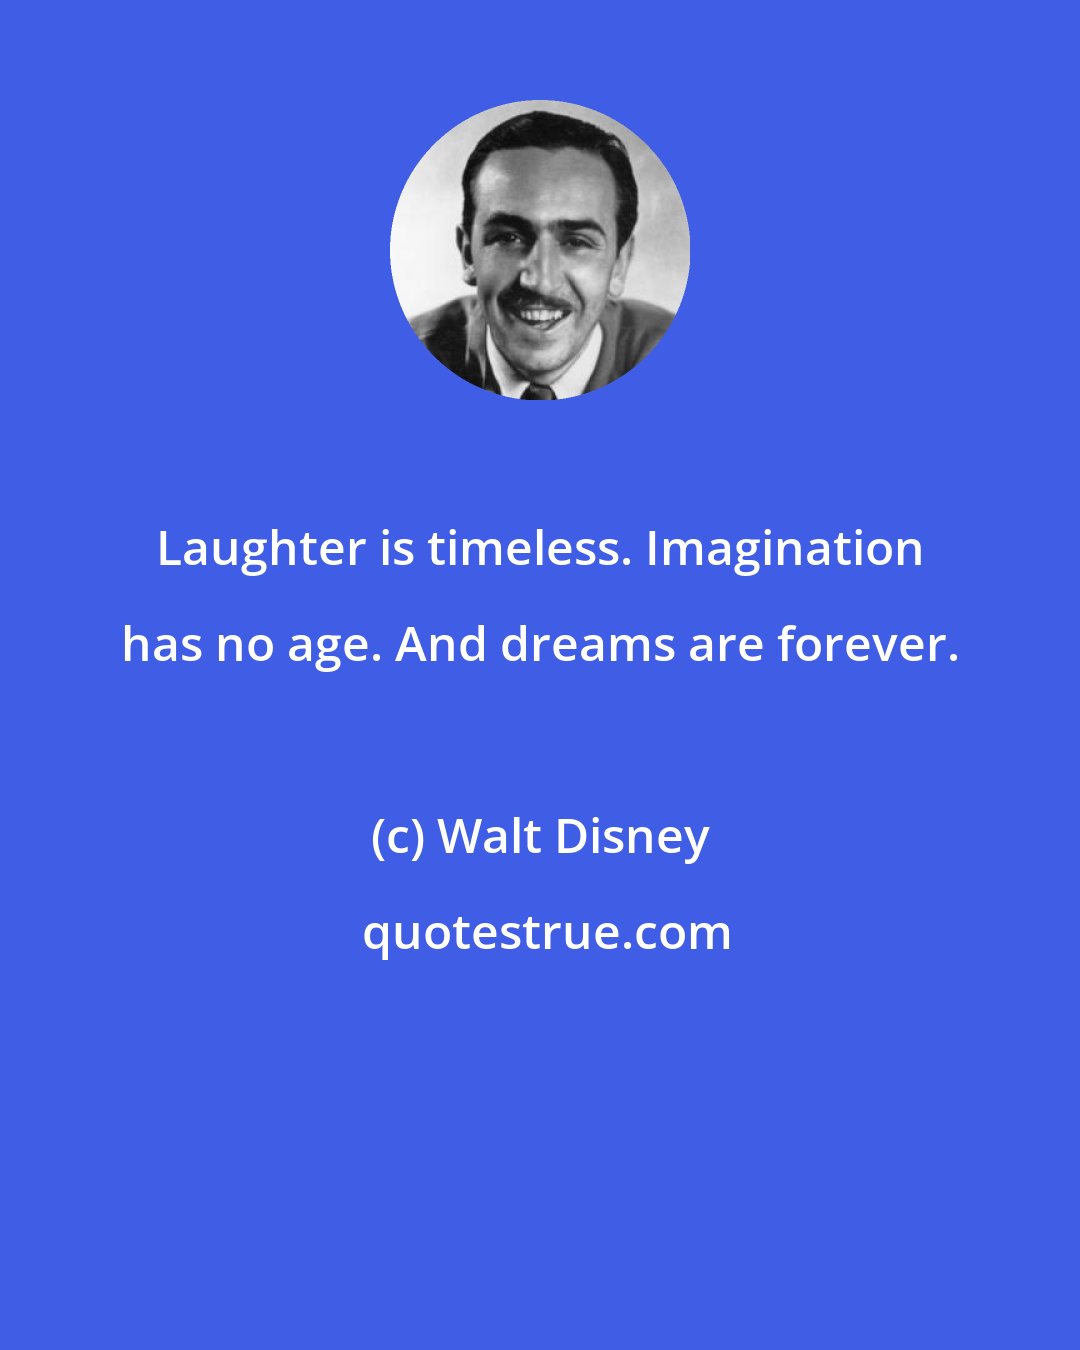 Walt Disney: Laughter is timeless. Imagination has no age. And dreams are forever.